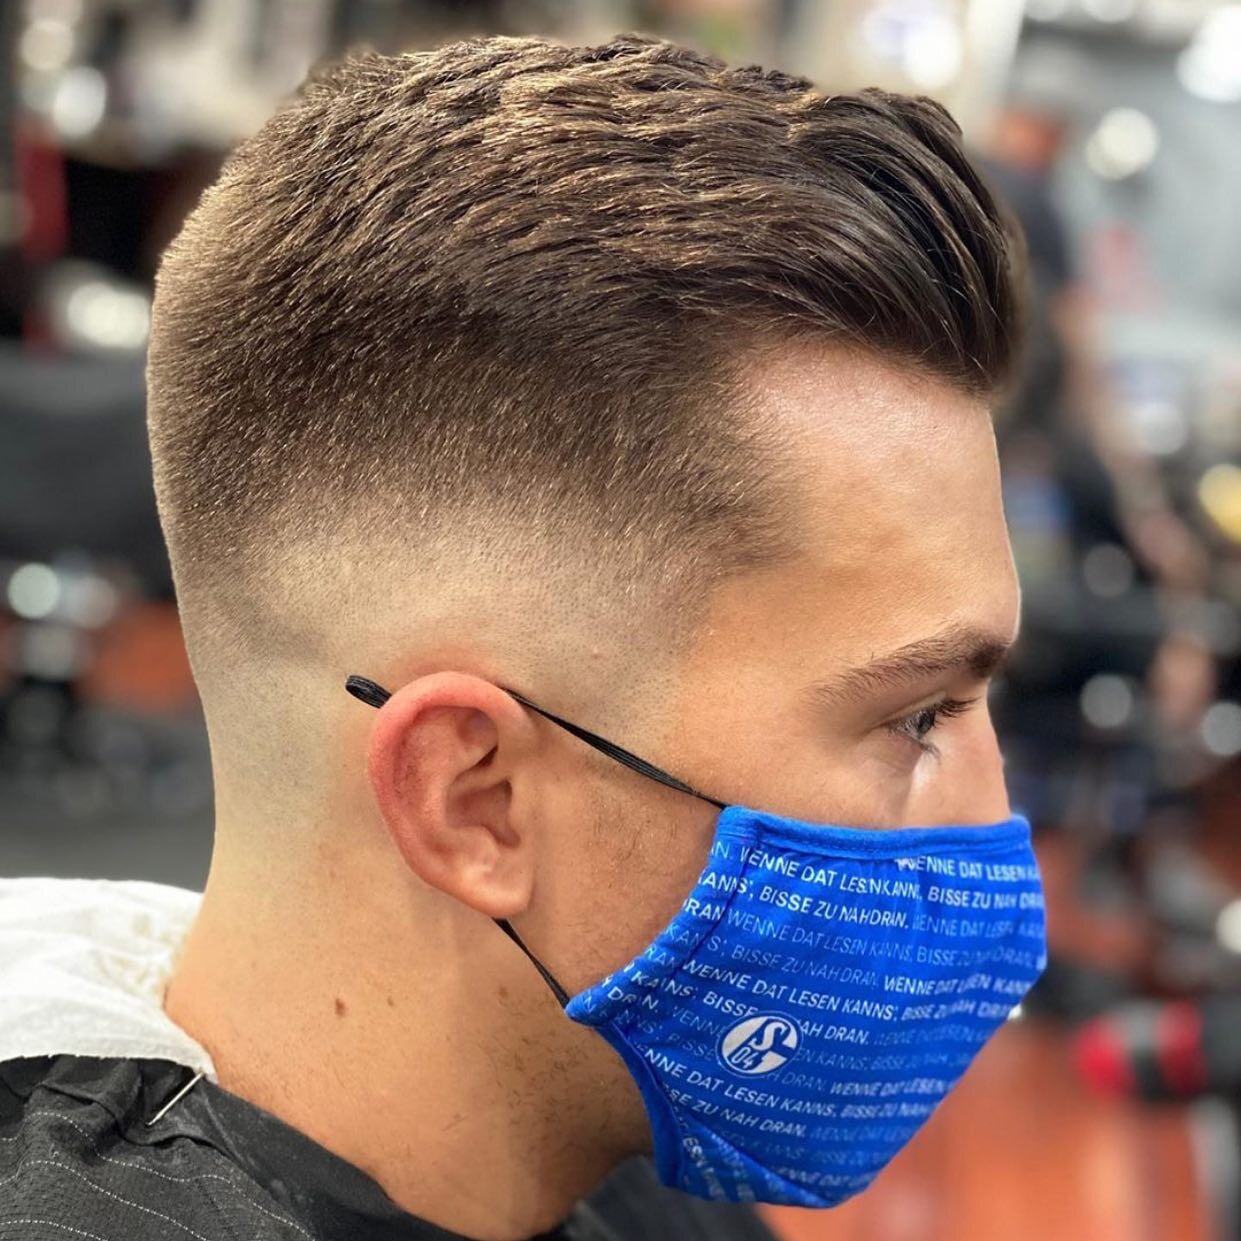 A great haircut done by Netty! We&rsquo;re pretty booked up today but we&rsquo;d love to have you in next week! Set up your appointment by clicking the &lsquo;Book Now&rsquo; button in our bio. 
#appointmentsavailable #bostonbarbertattooco #northend 